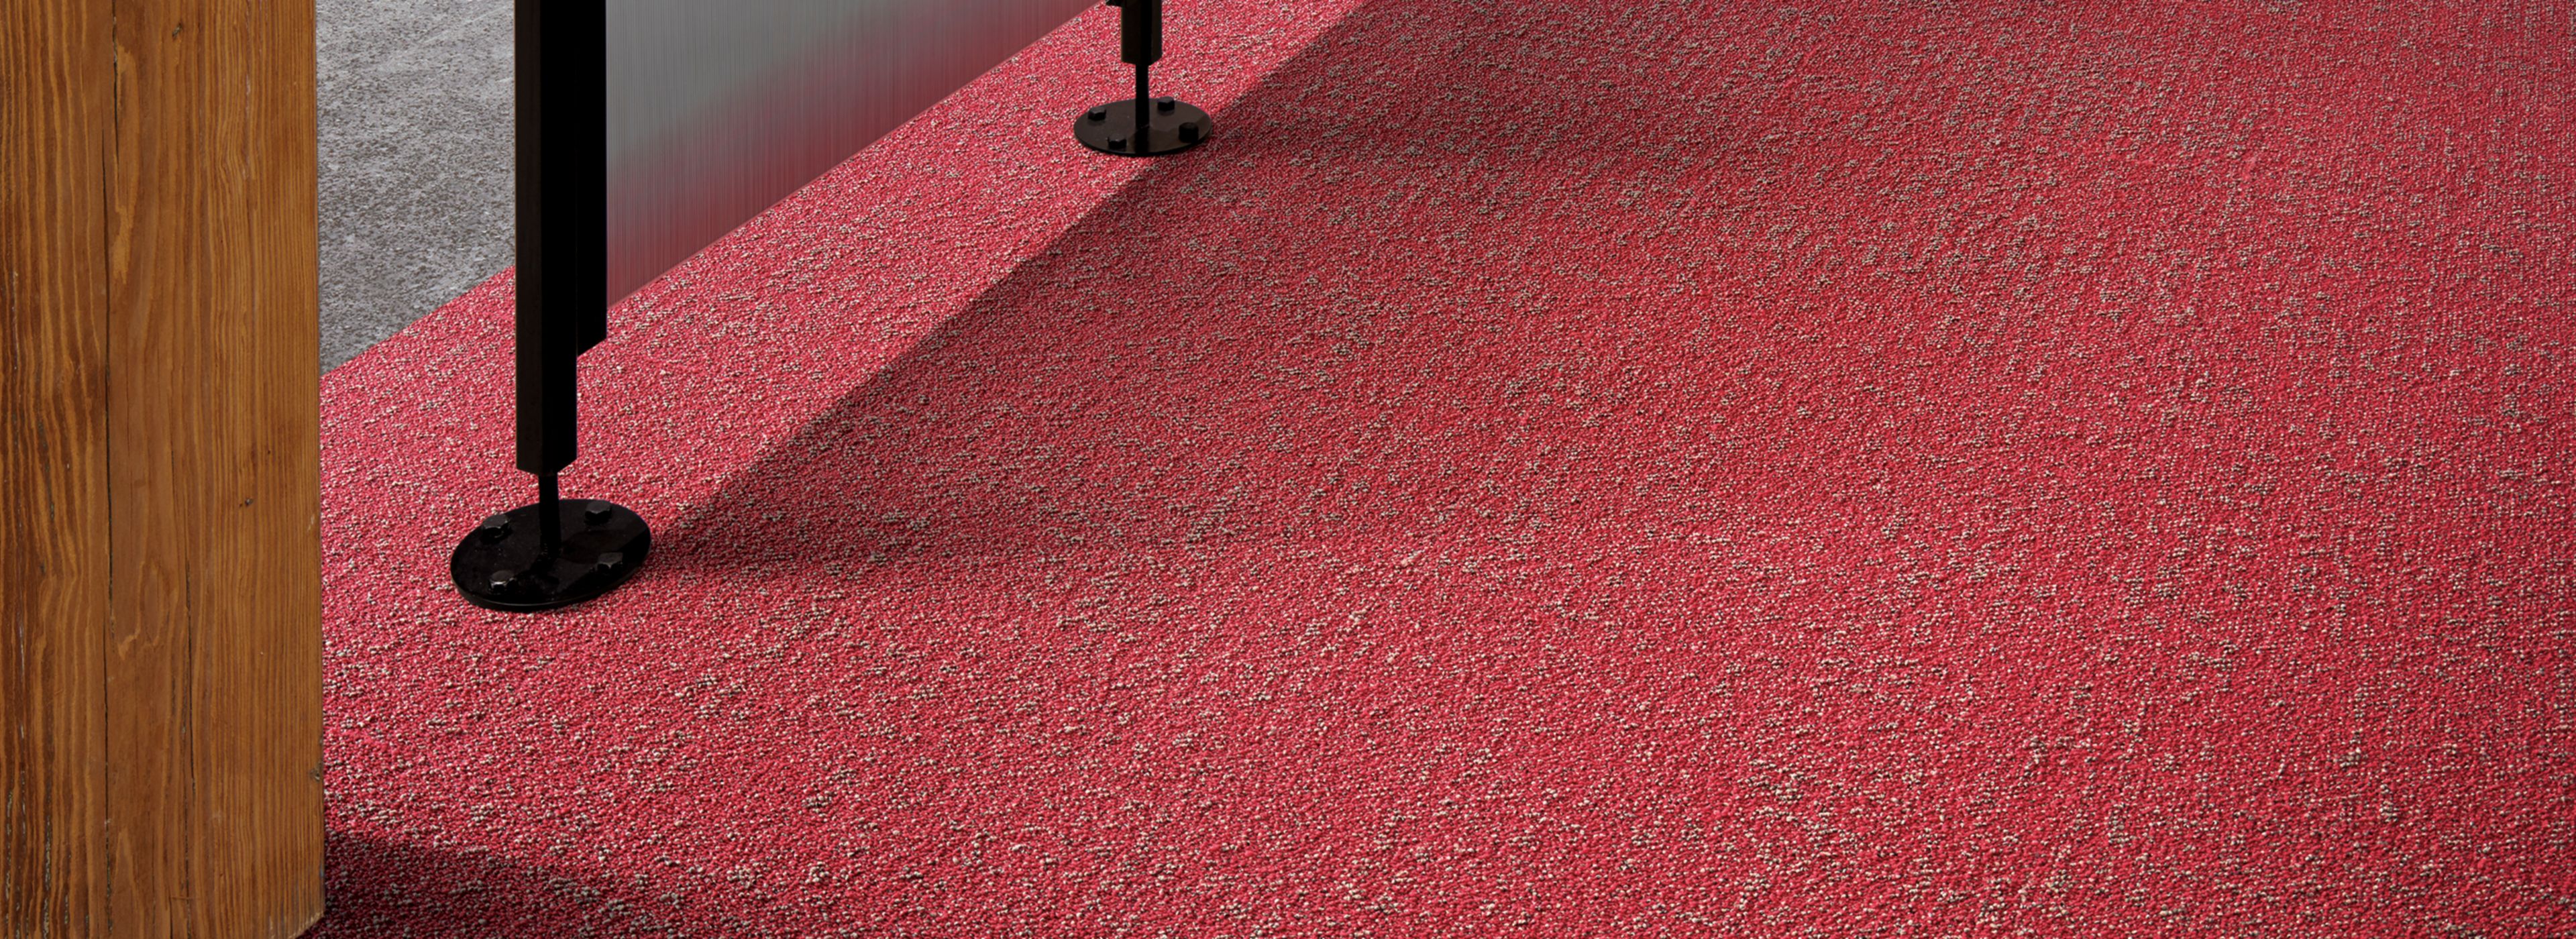 image Interface Step it Up and Walk of Life carpet tile office hallway numéro 1